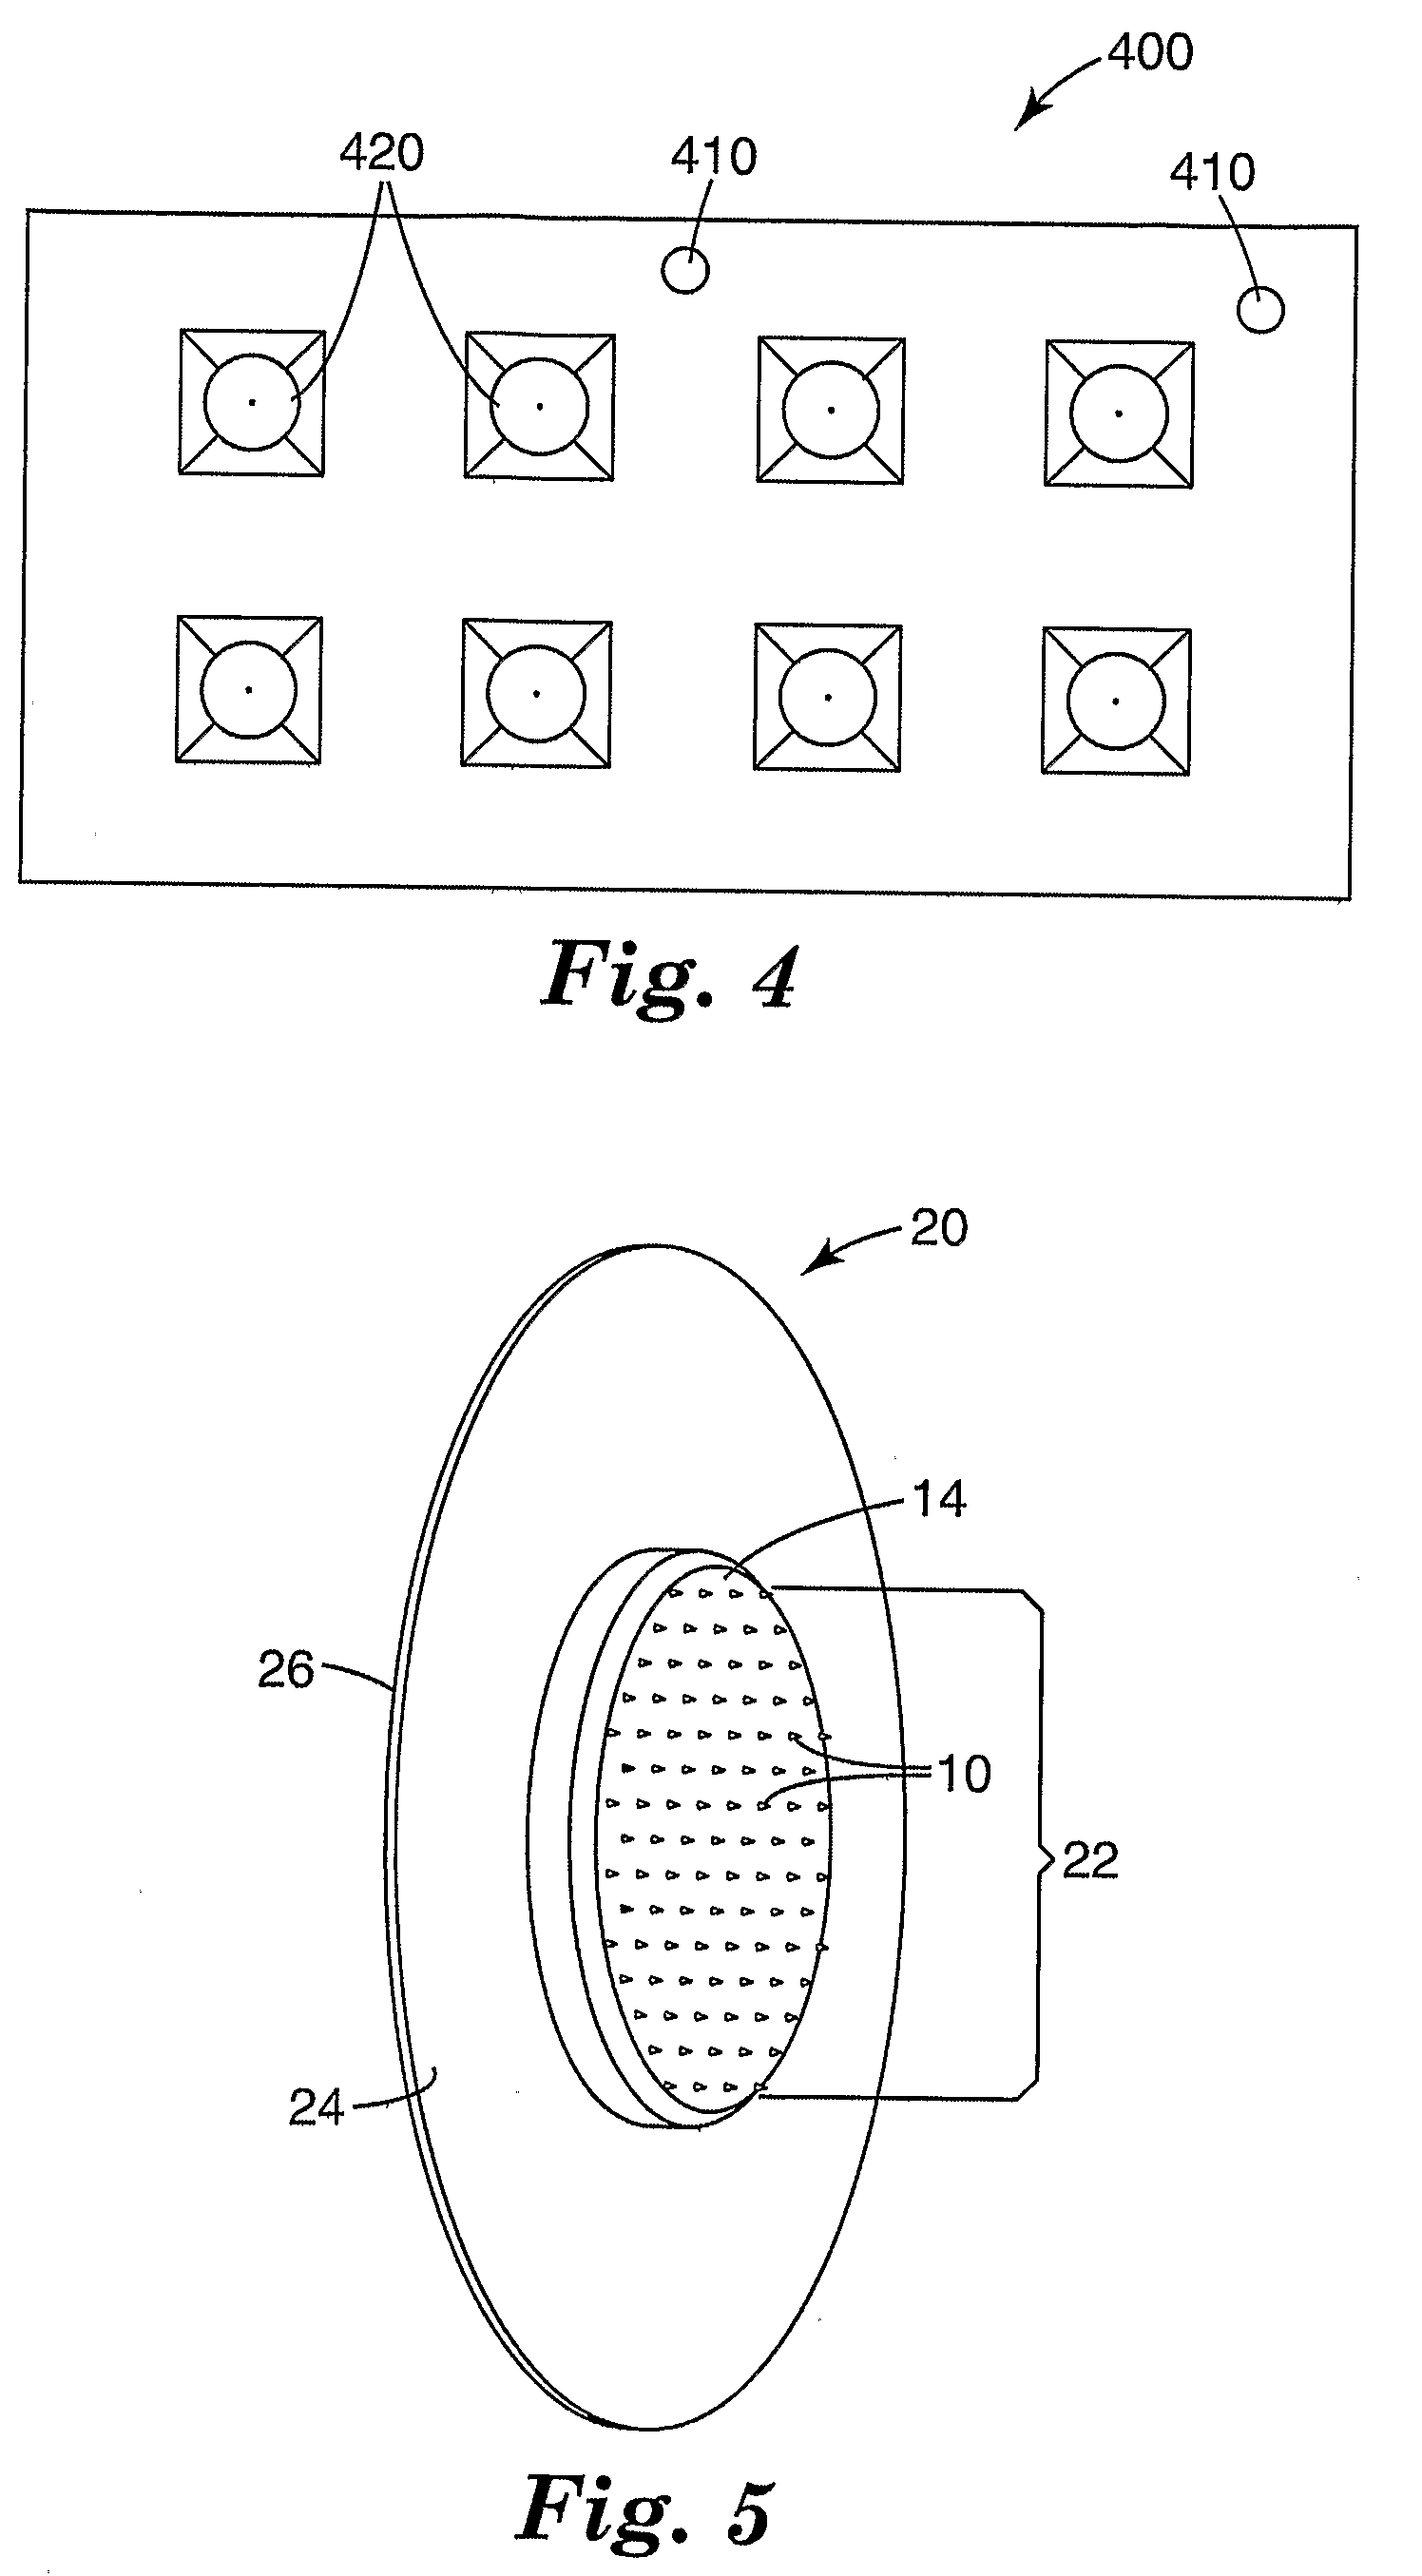 Microneedle Arrays and Methods of Use Thereof